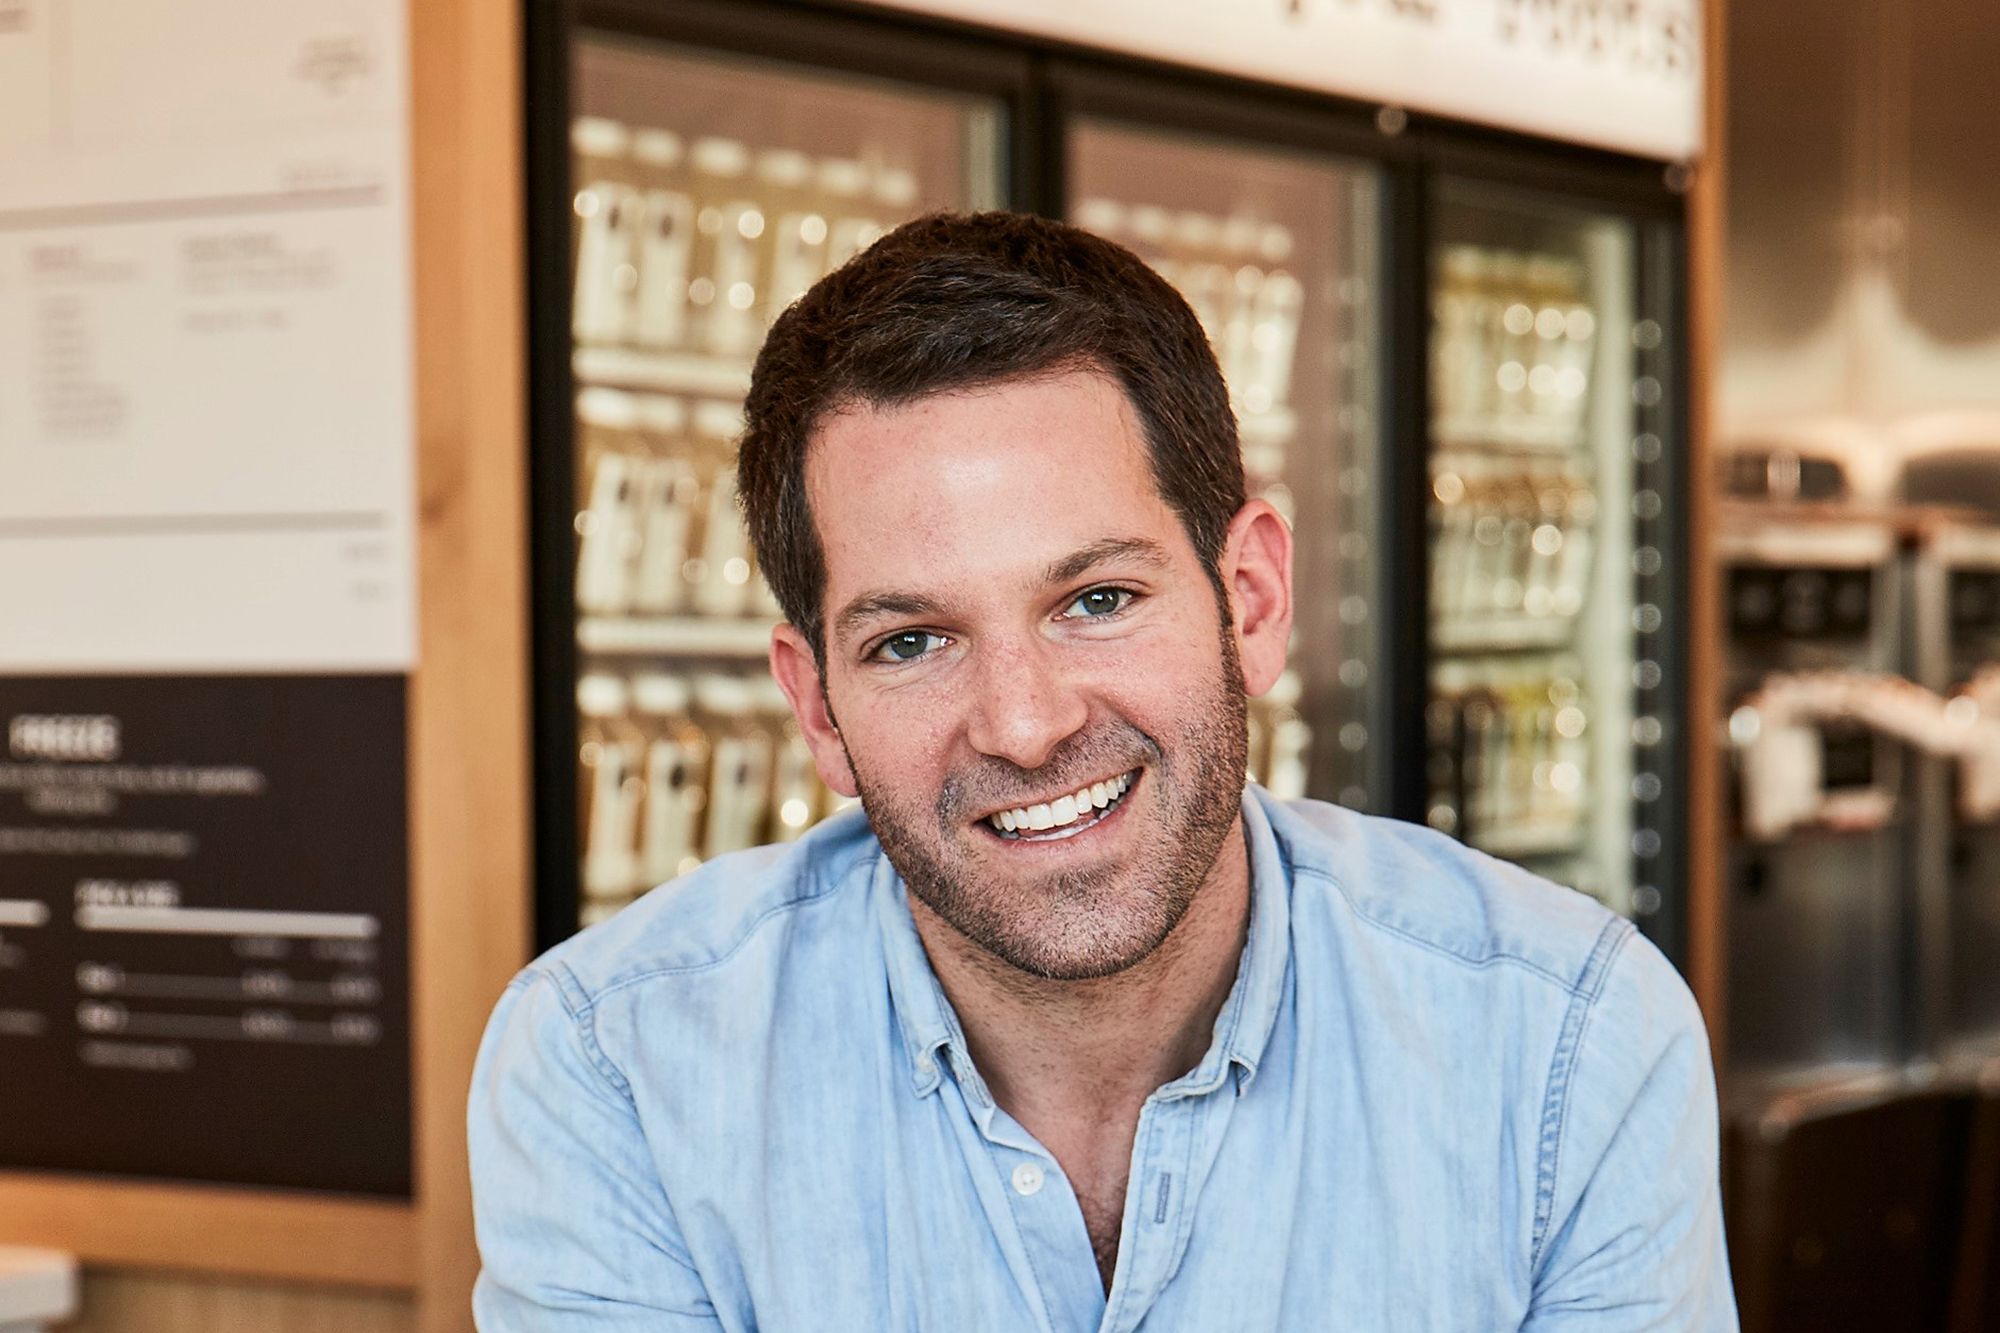 How the Founder of Pressed Juicery Turned $30,000 Into a Projected $75 Million Company